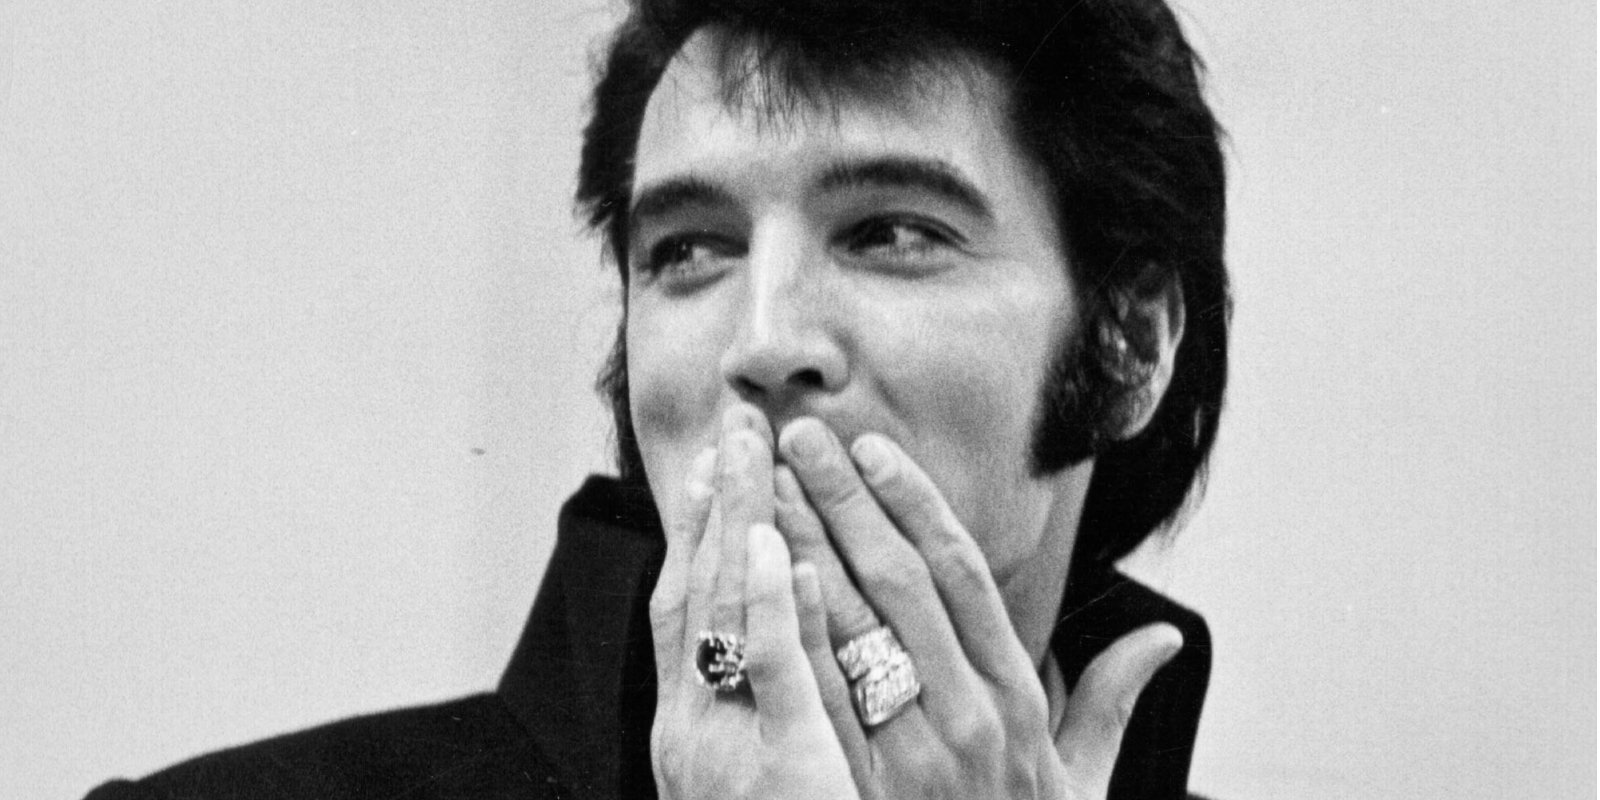 Elvis Presley holds his hands in front of his mouth in a black and white photo taken in 1969,